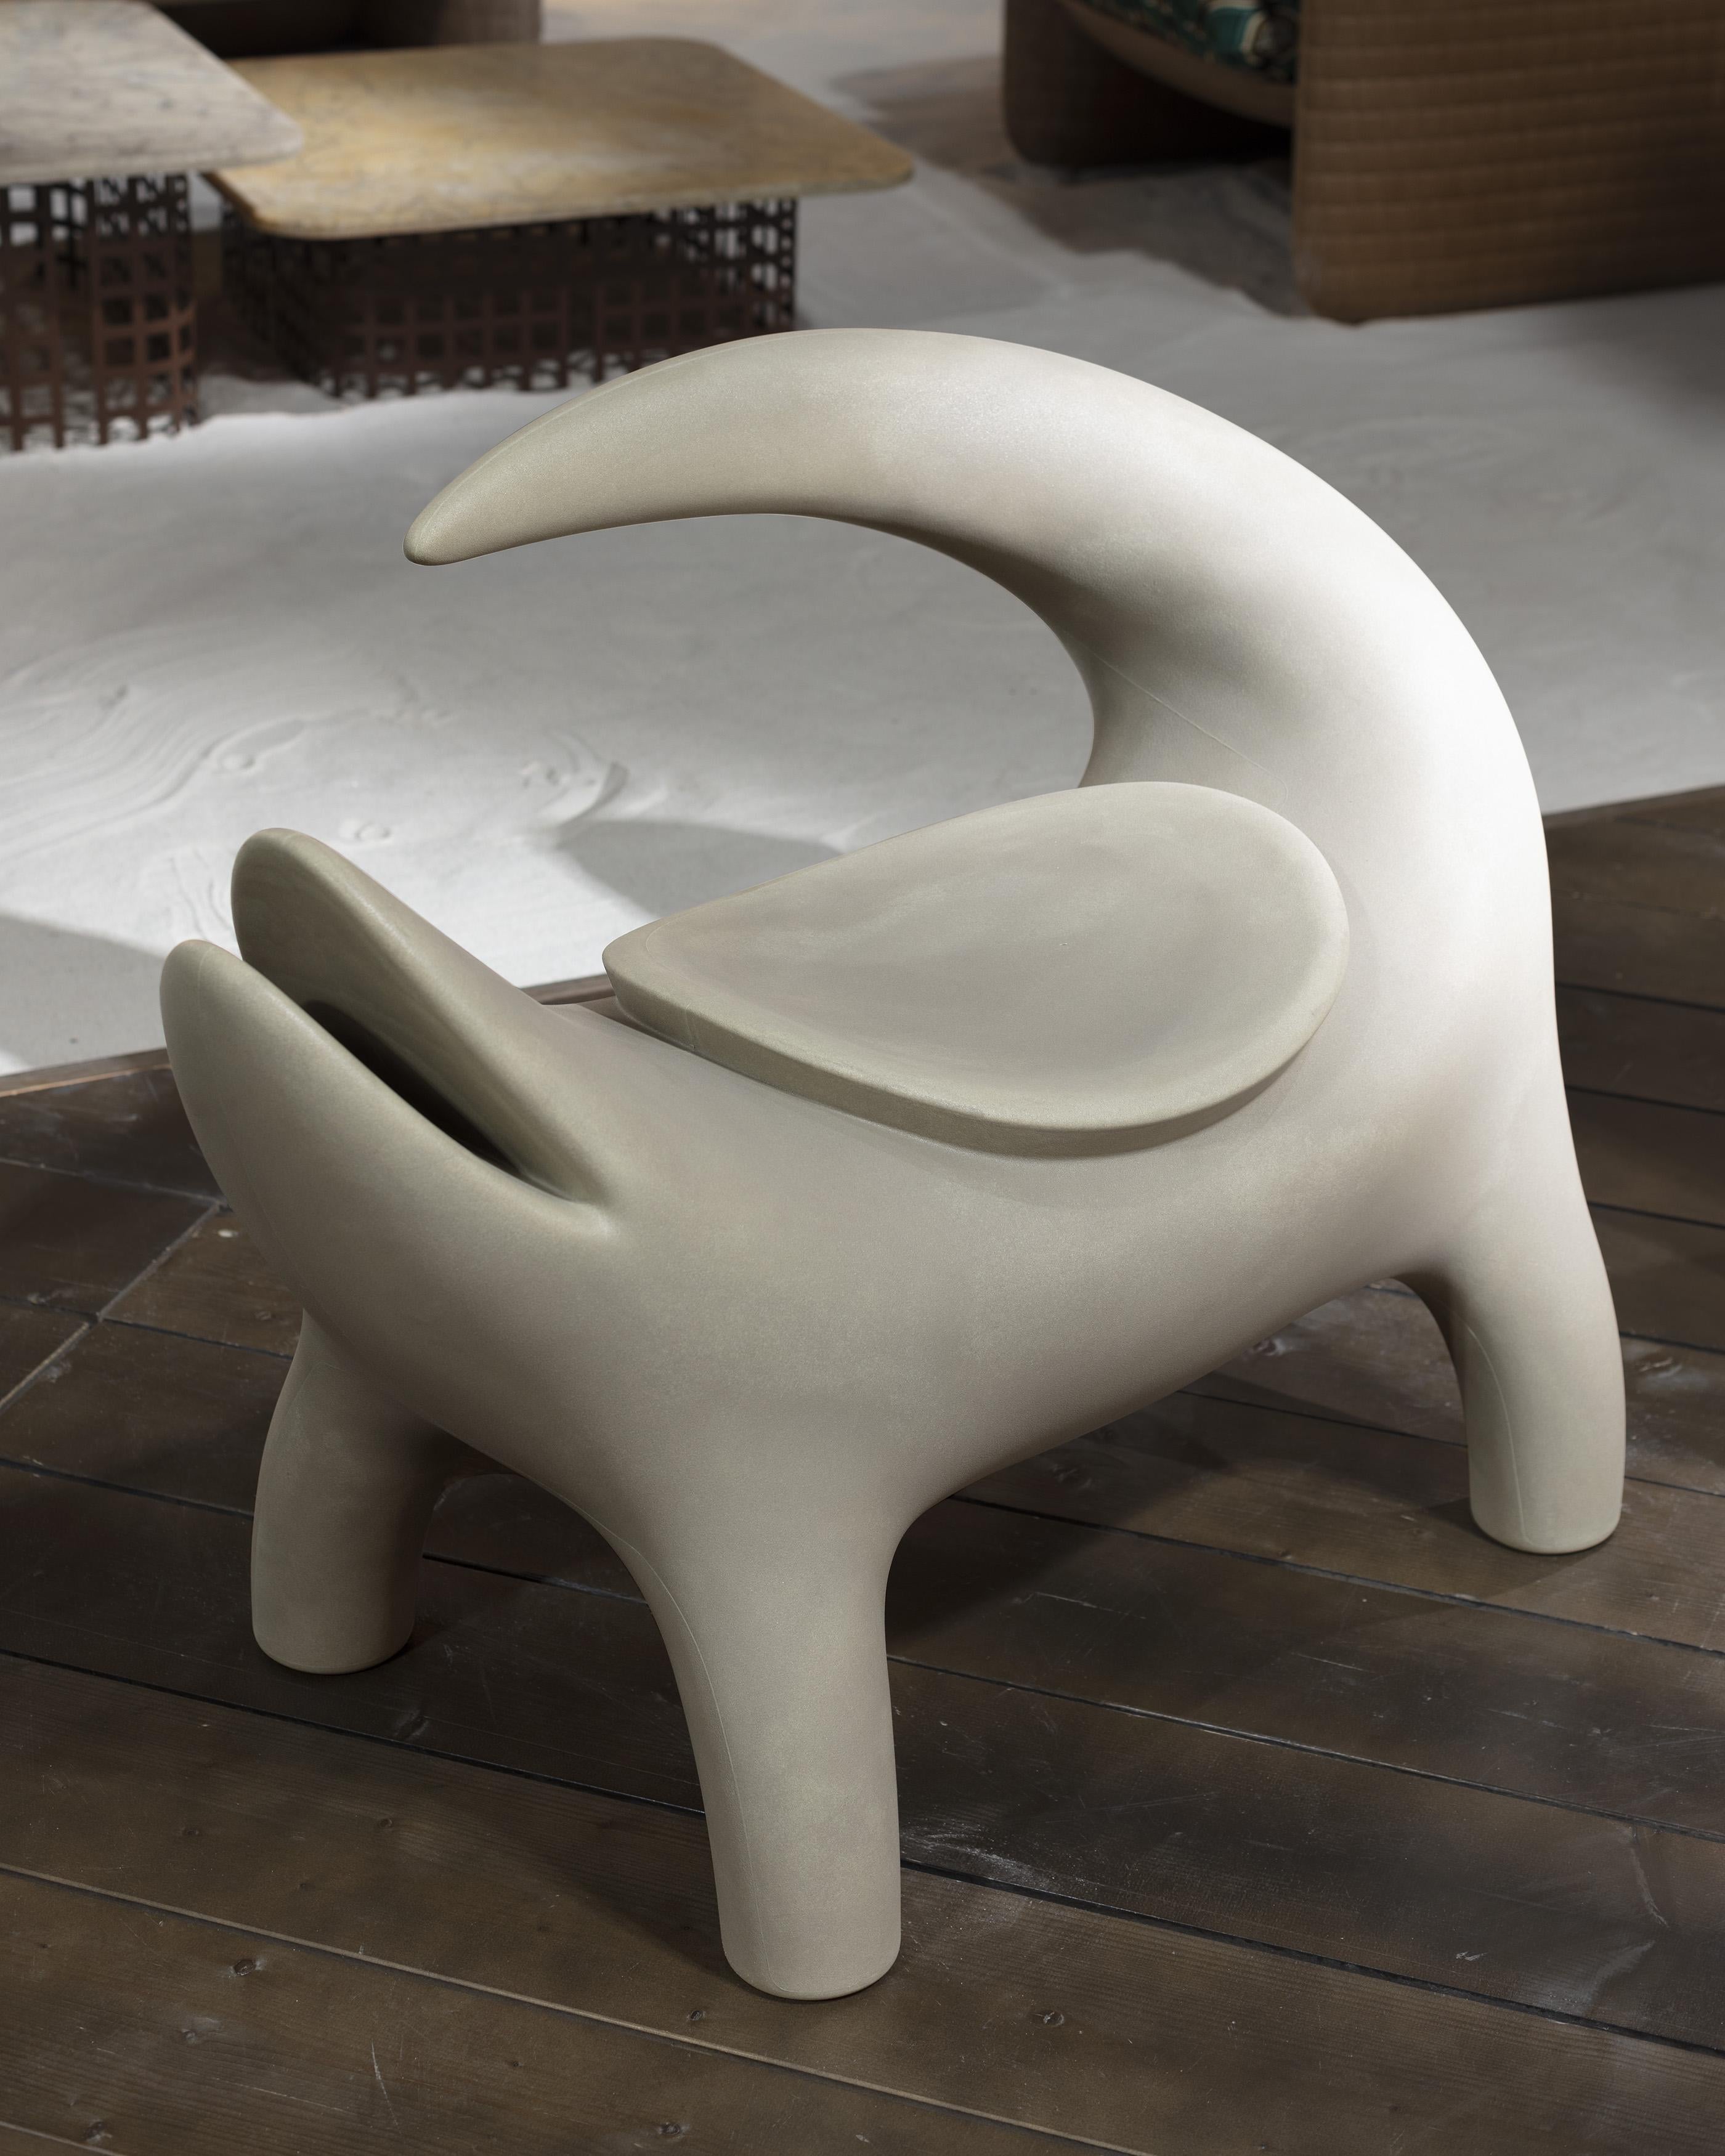 Sahara Sand Kroko Armchair by Marcantonio
Dimensions: D 60 x W 110 x H 74 cm. Seat Height: 43 cm.
Materials: Polyethylene.
Weight: 11 kg.

Also available in biobased polyethylene of vegetal origin, obtained from
sugar cane. Available in different